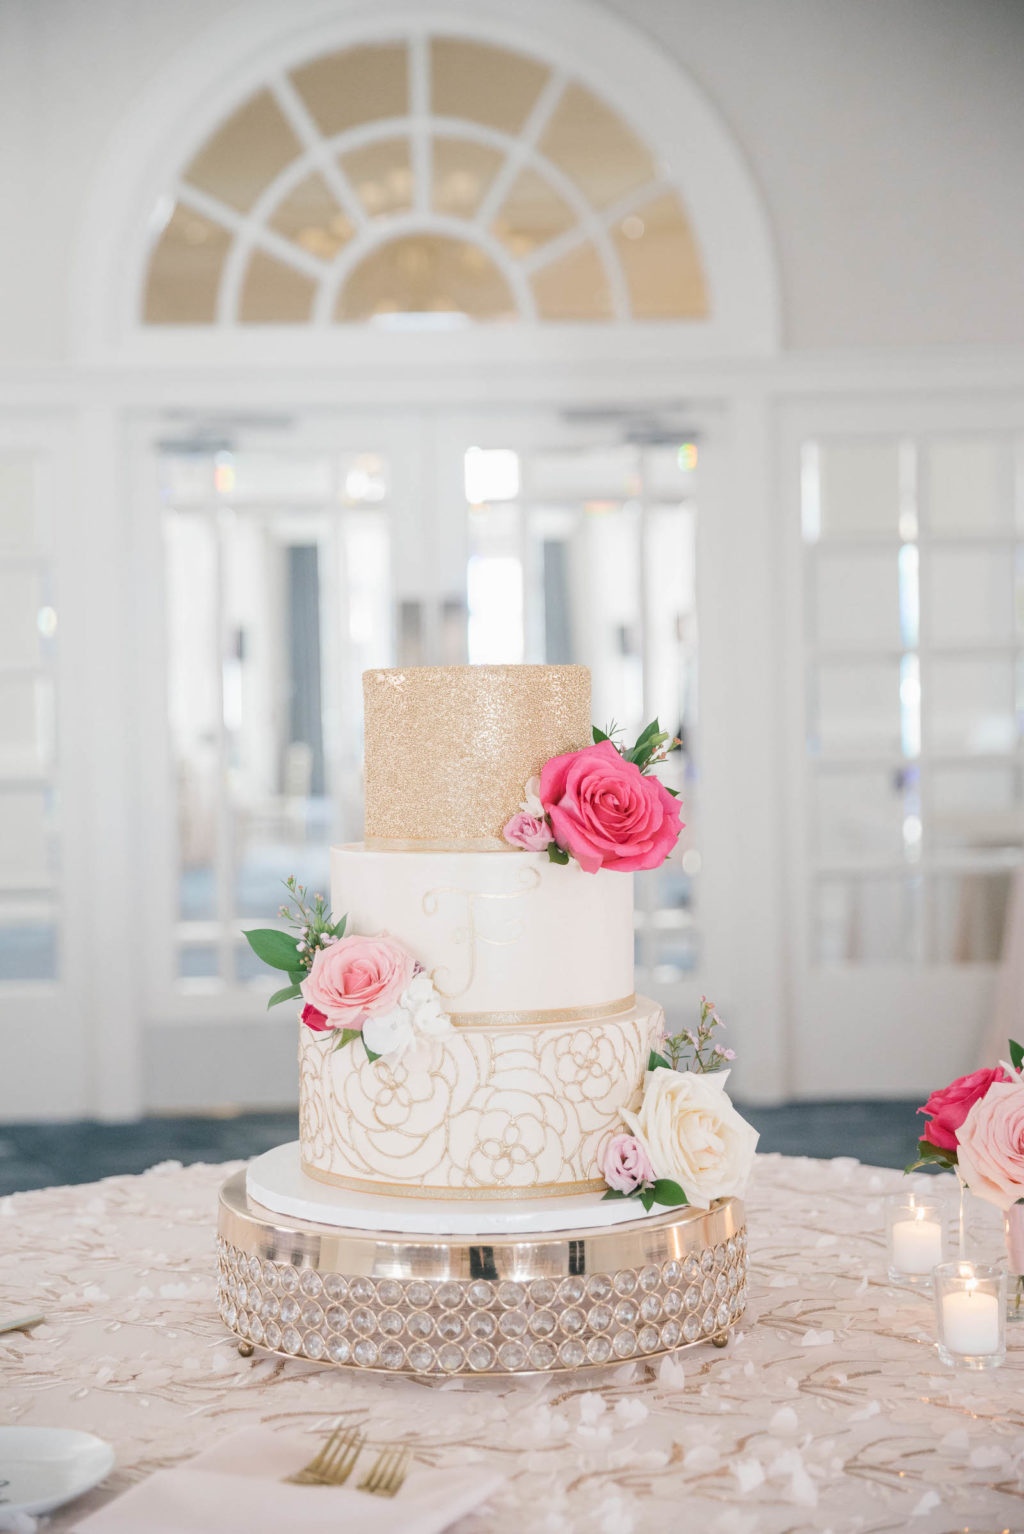 Three Tier White and Gold Wedding Cake with Vibrant Pink Roses on Crystal and Gold Cake Stand | Tampa Bay Wedding Planner Parties A'la Carte | Wedding Cake The Artistic Whisk